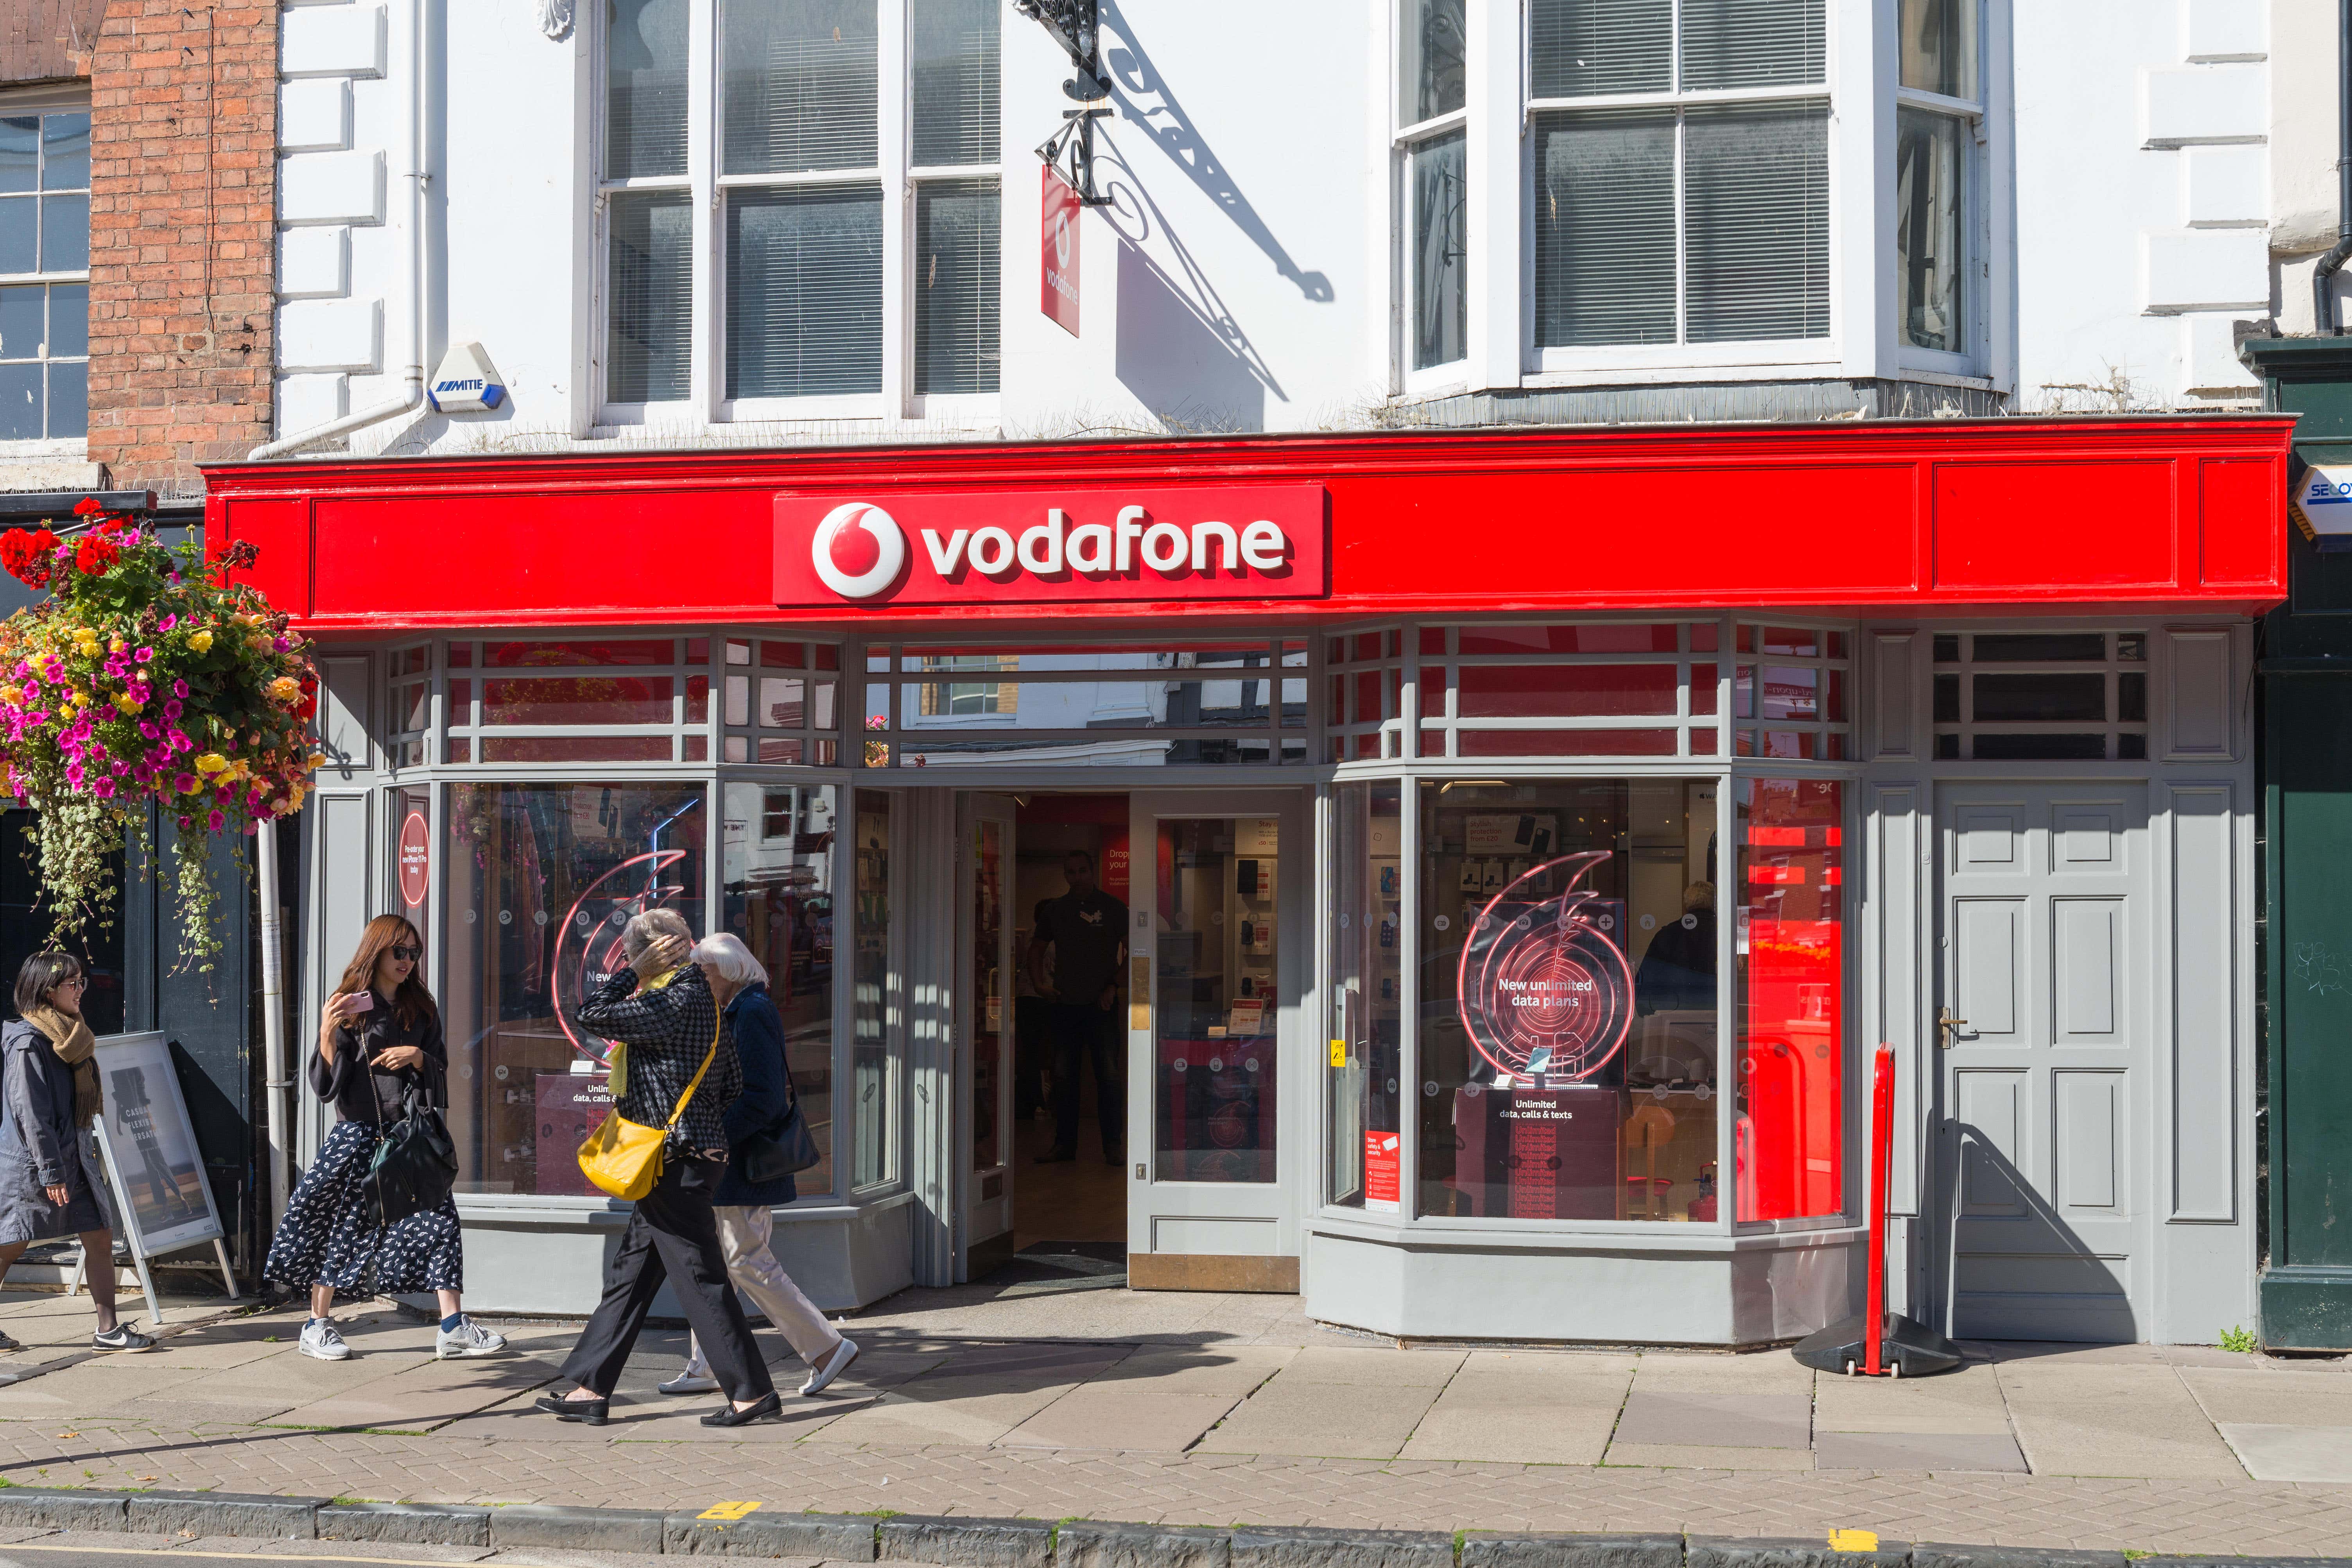 Mobile phone giant Vodafone expects its full-year profits to be impacted by higher energy costs and inflation – as it plans to cut costs by one billion euros (Nick Maslen/Alamy/PA)